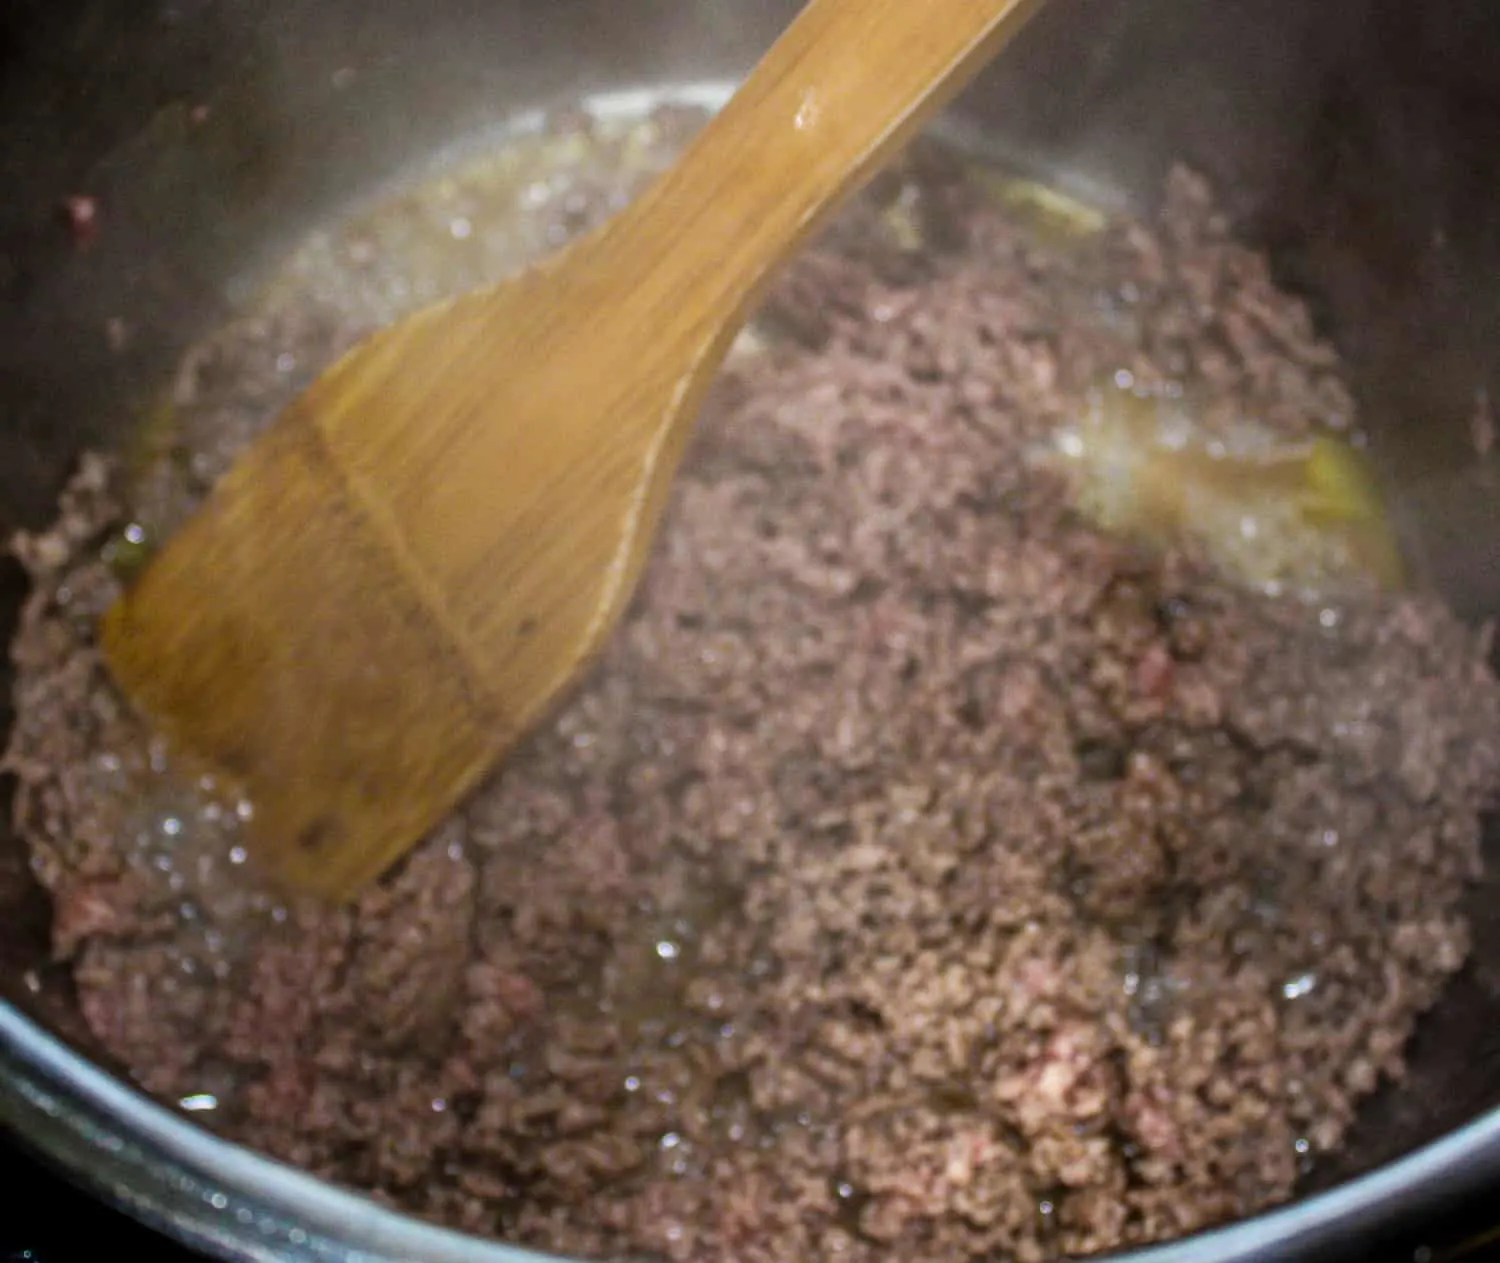 Browning the ground beef.